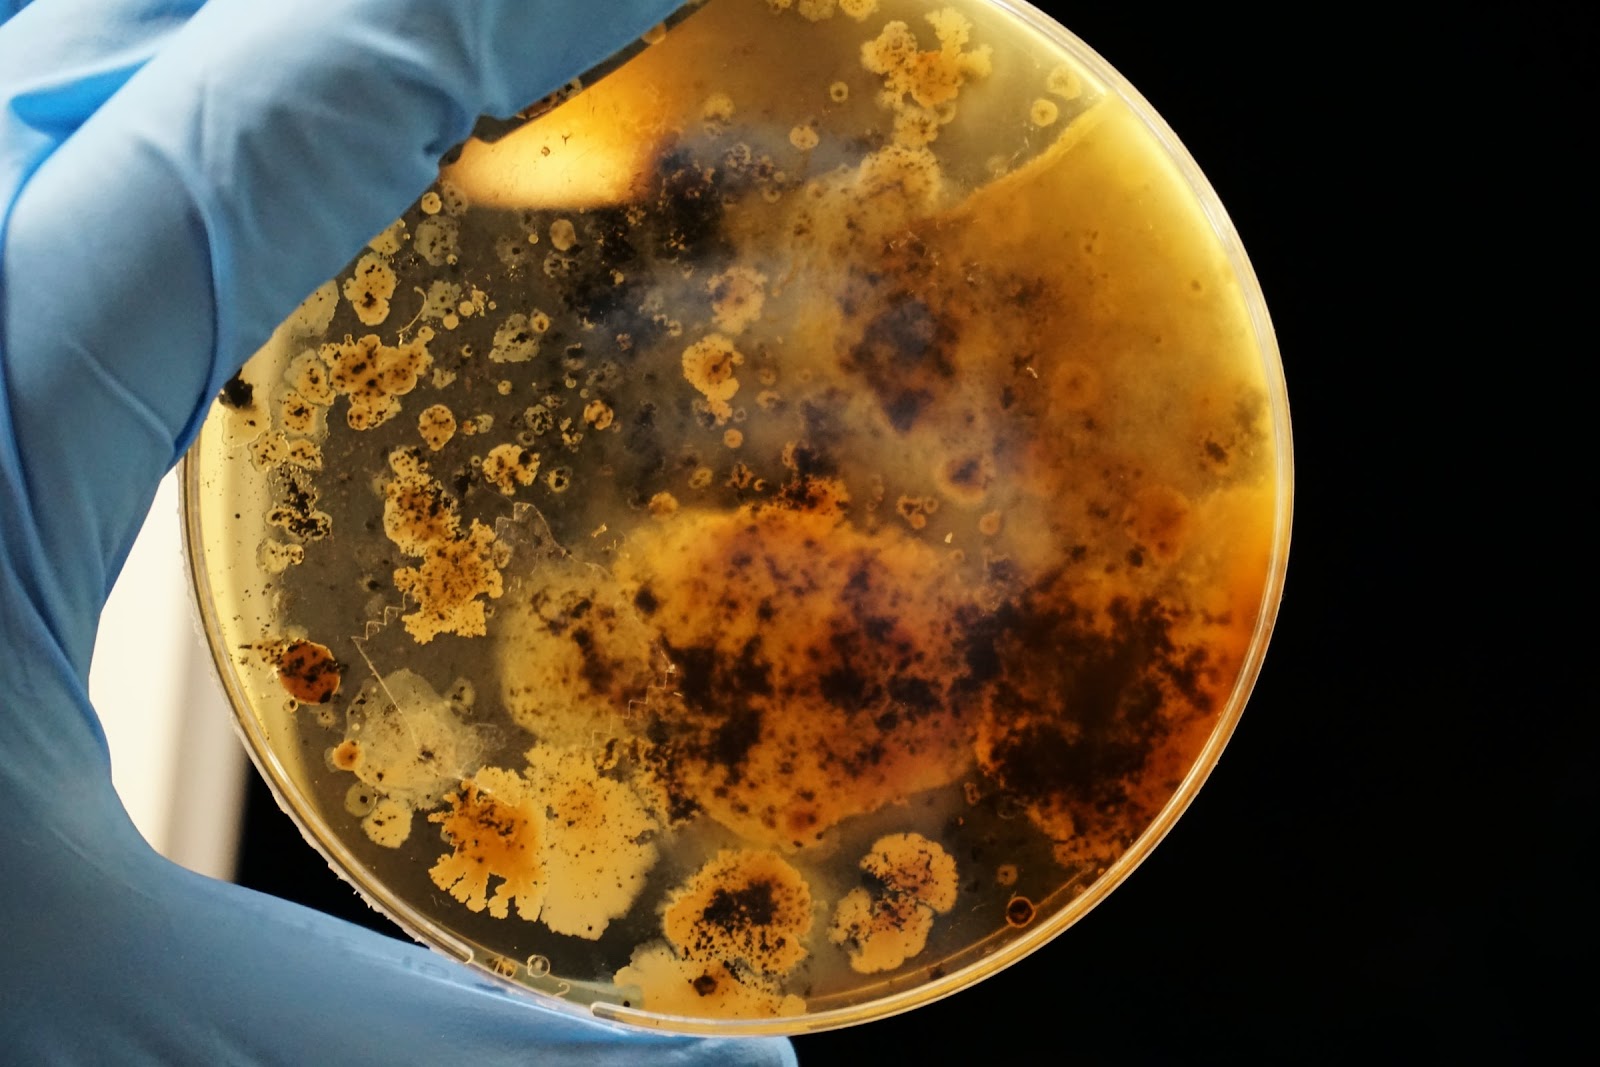 A blue gloved hand holds up a petri dish that is rife with bacteria and growth. 